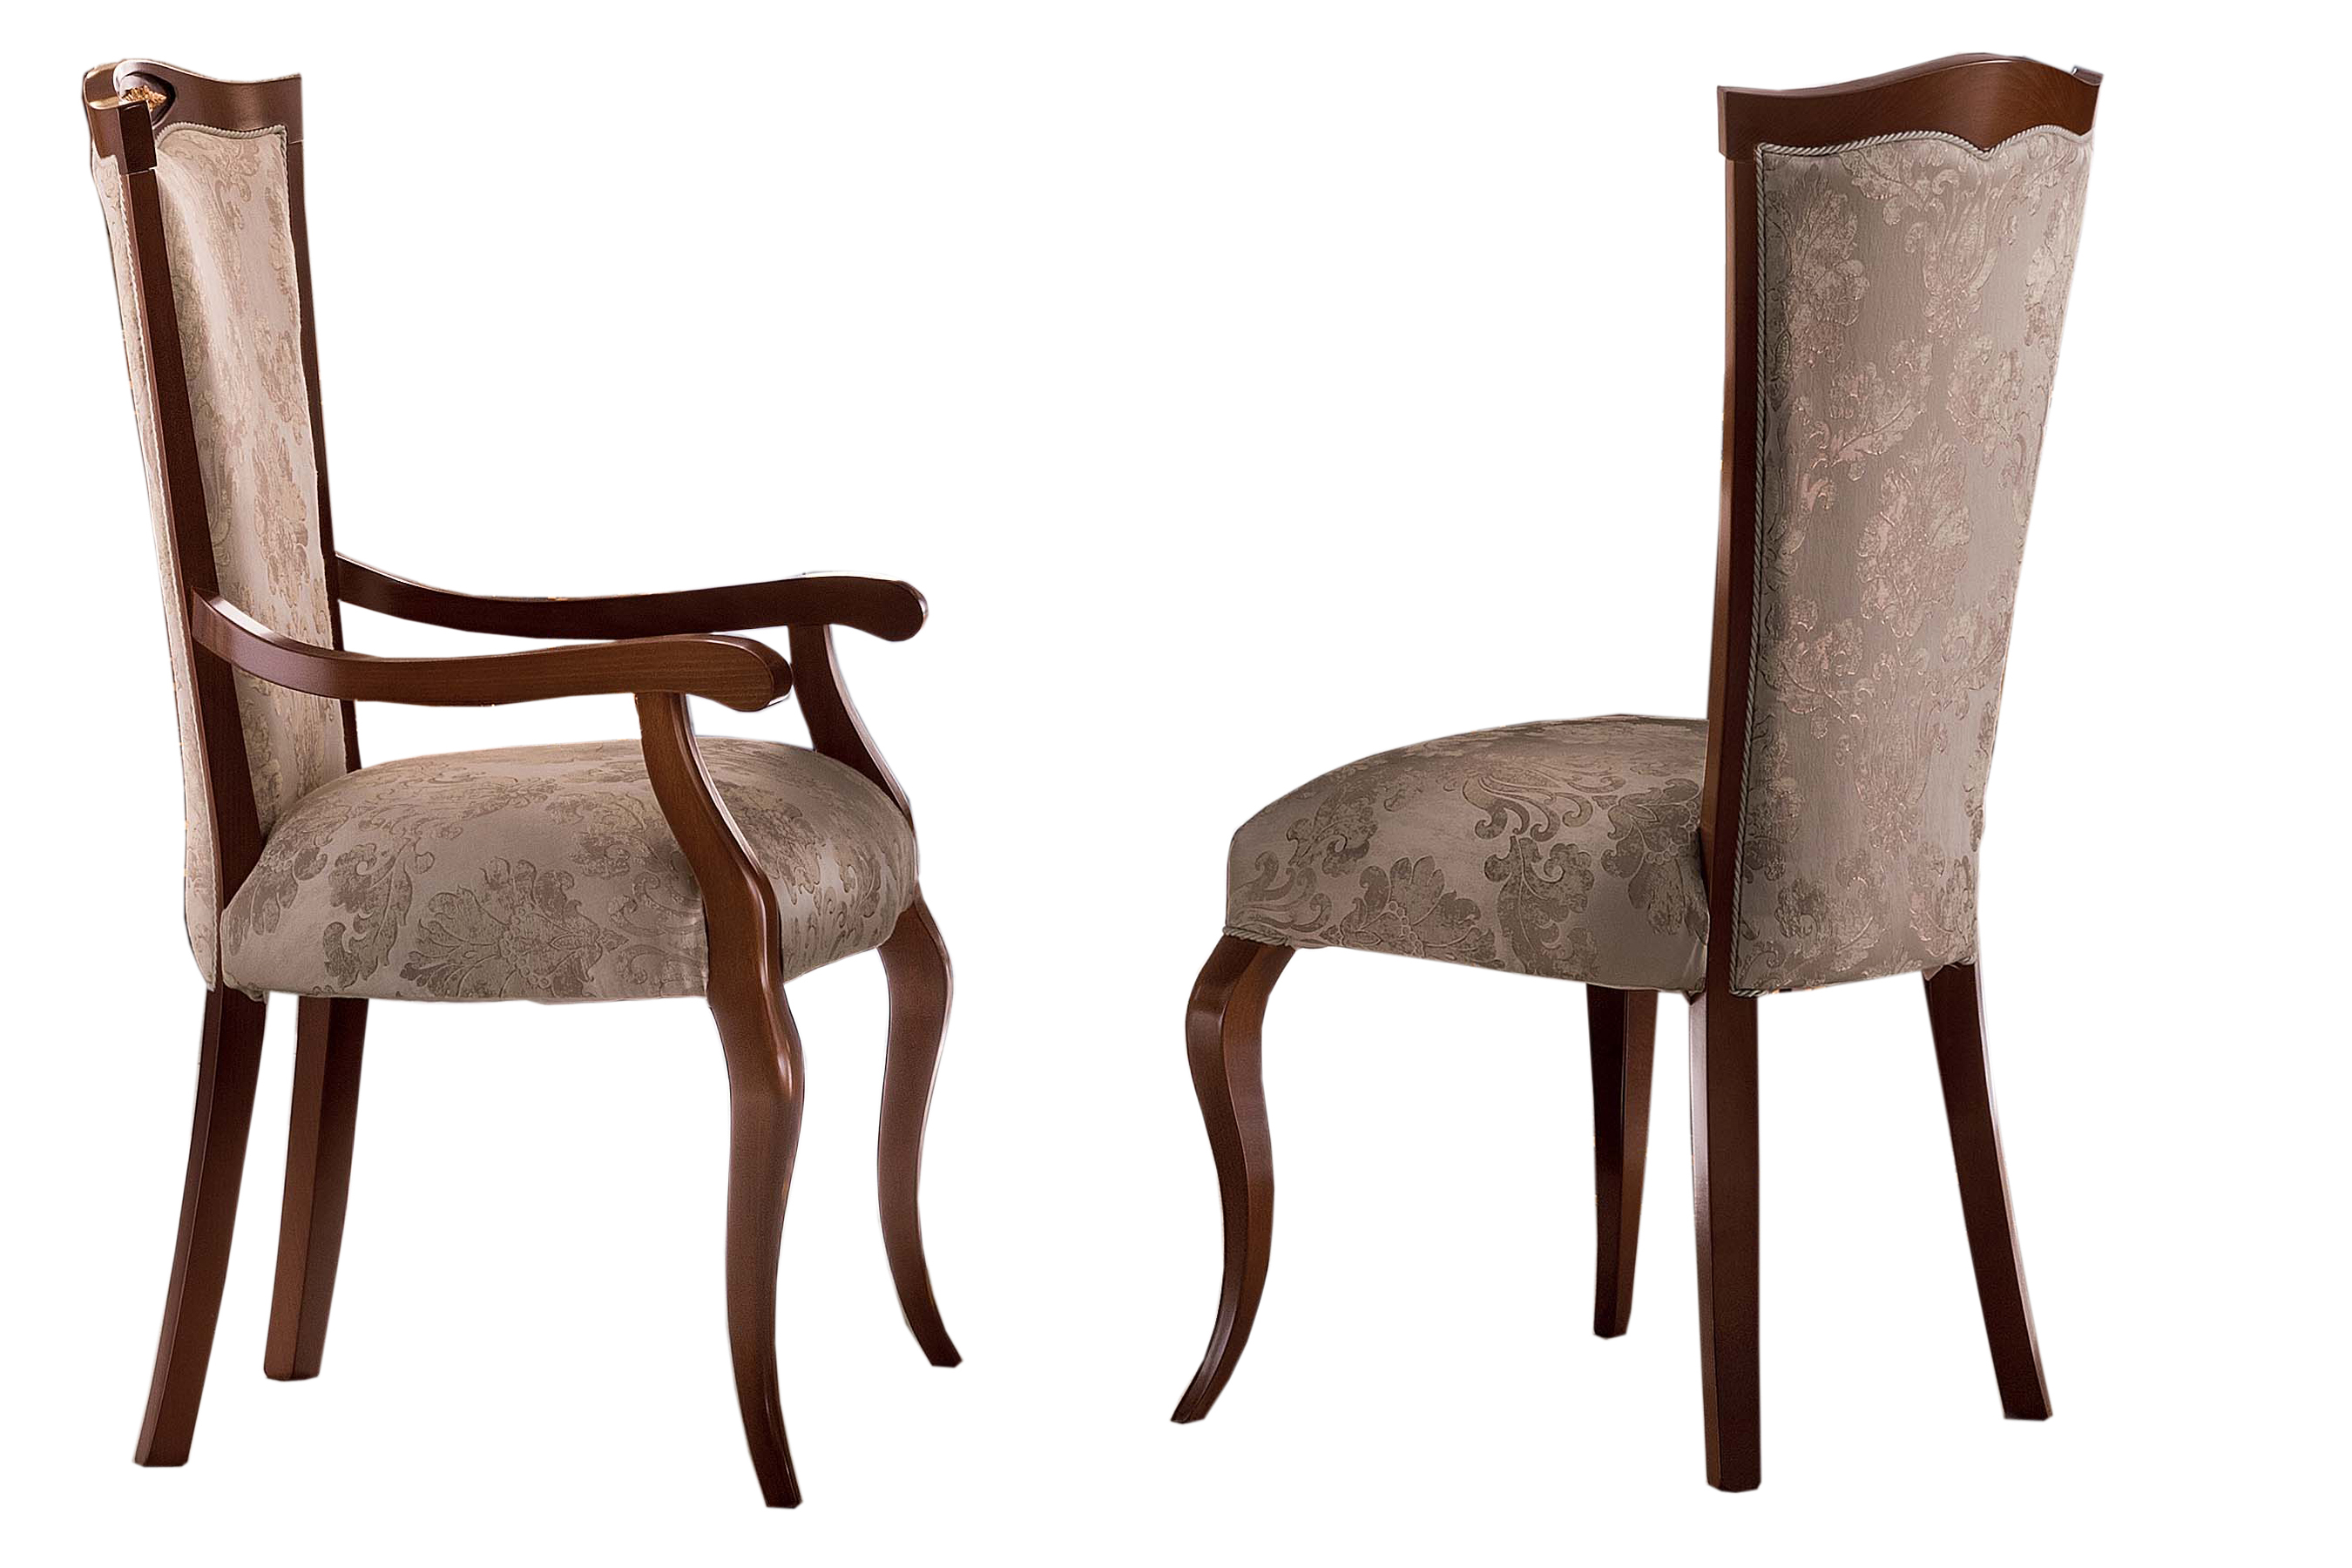 Dining Room Furniture Modern Dining Room Sets Modigliani Chair by Arredoclassic